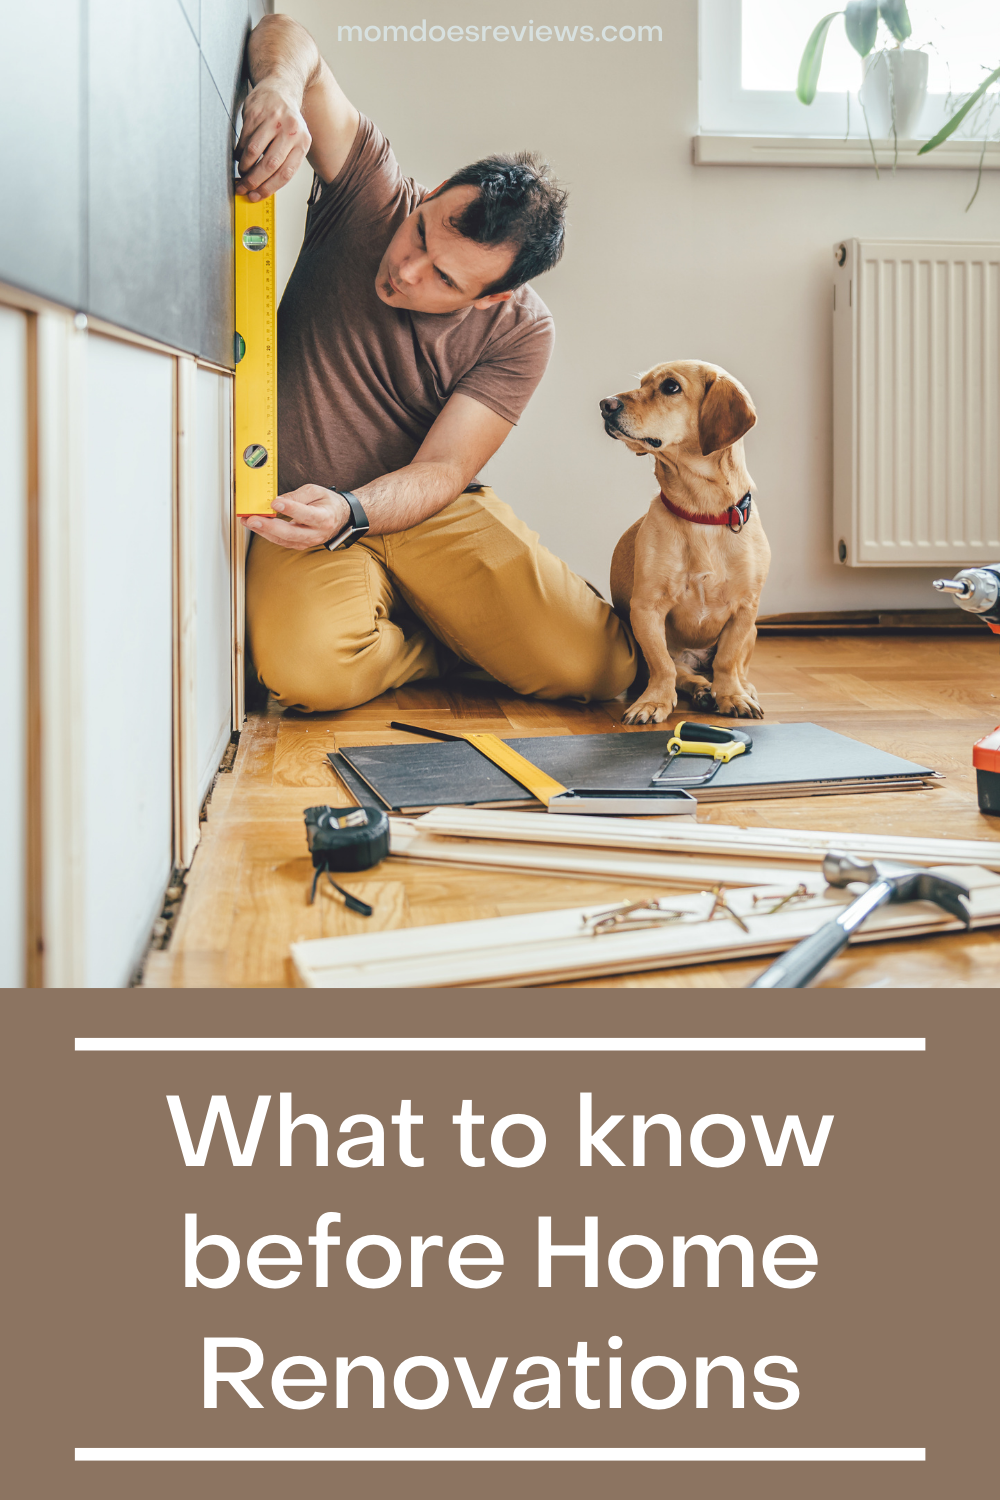 12 Things You Should Know Before Your Home Renovation